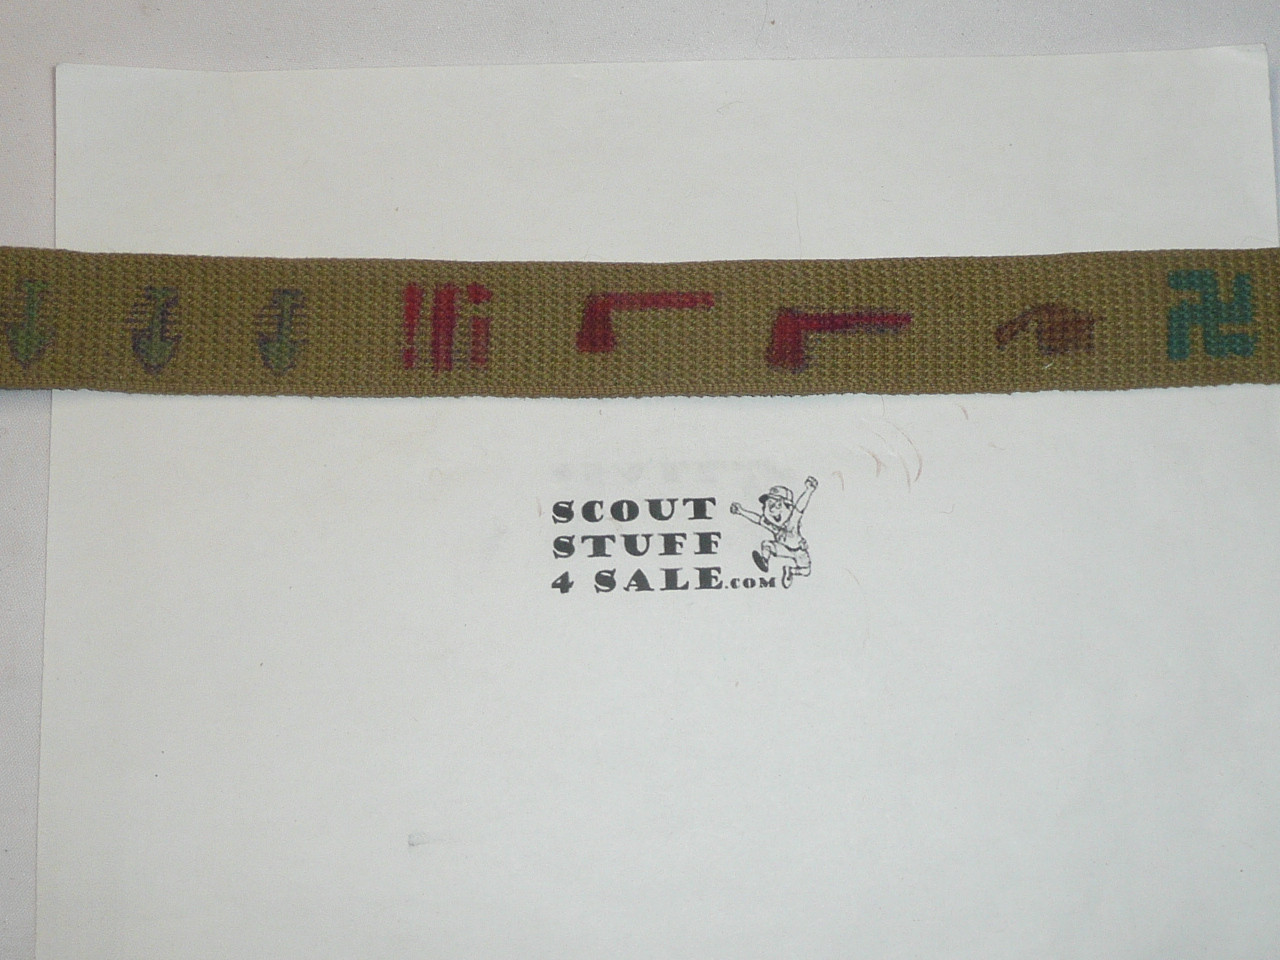 1950's Boy Scout Friction Belt and Buckle, camp achievements on webbed belt